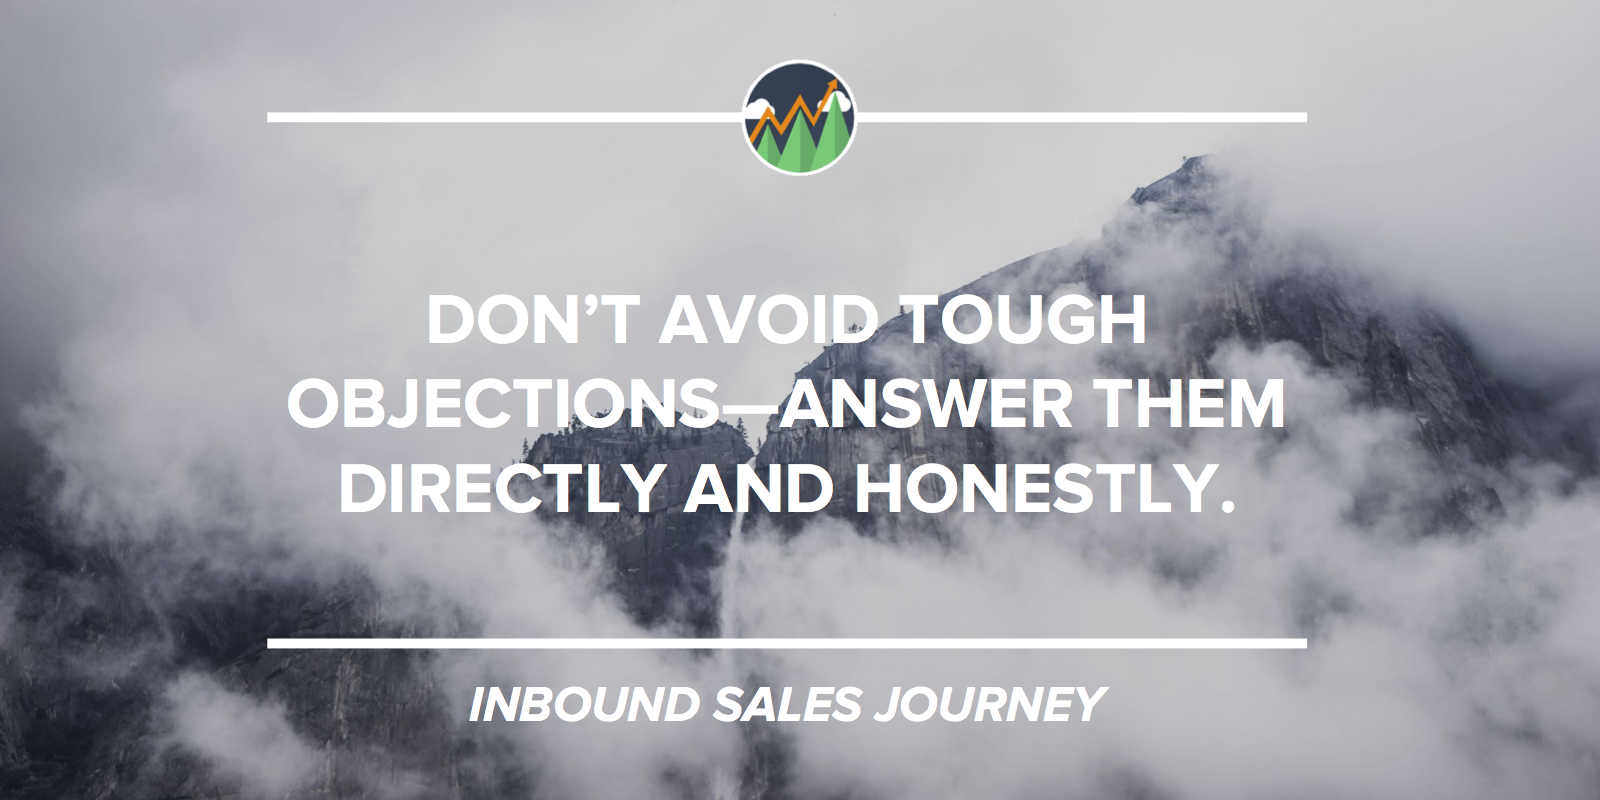 In Sales, You Should Answer Directly